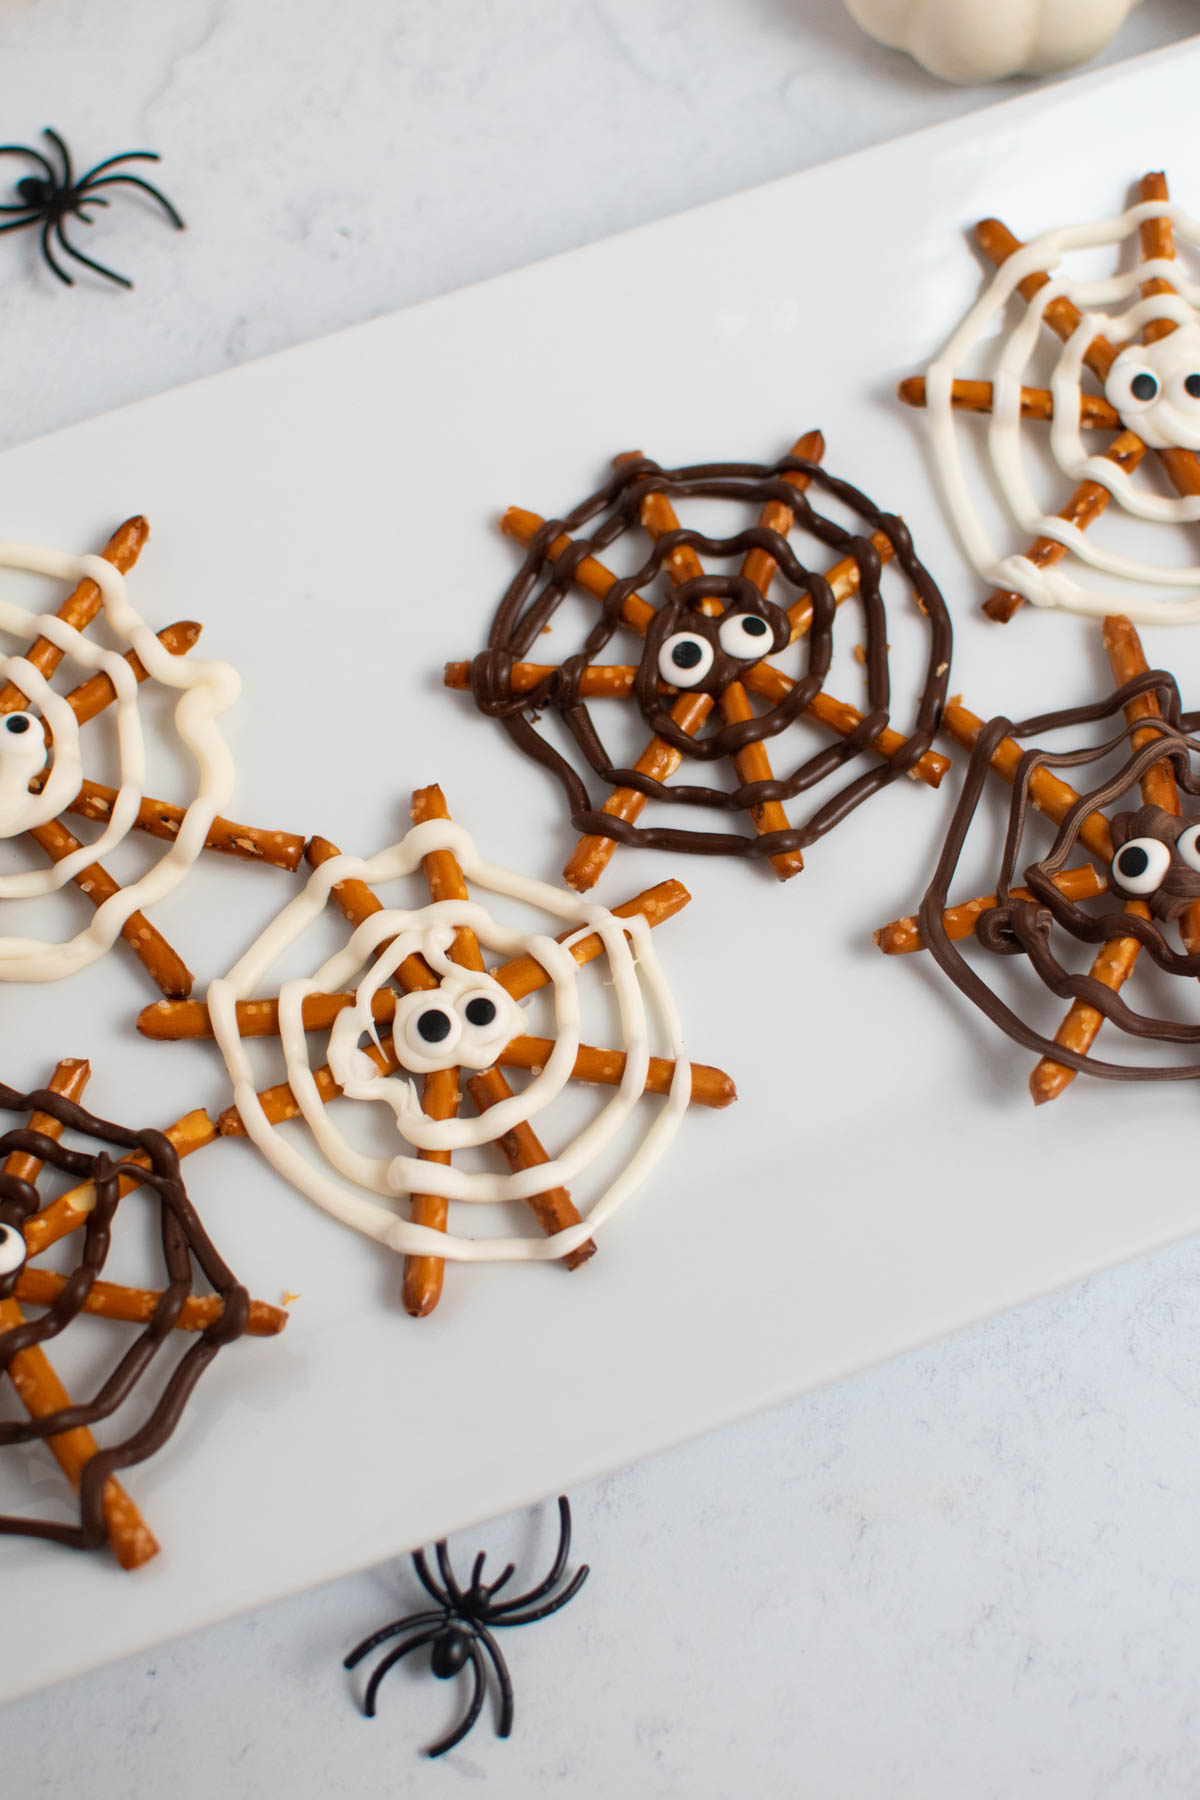 Chocolate pretzel spider webs with candy eyes on white platter.